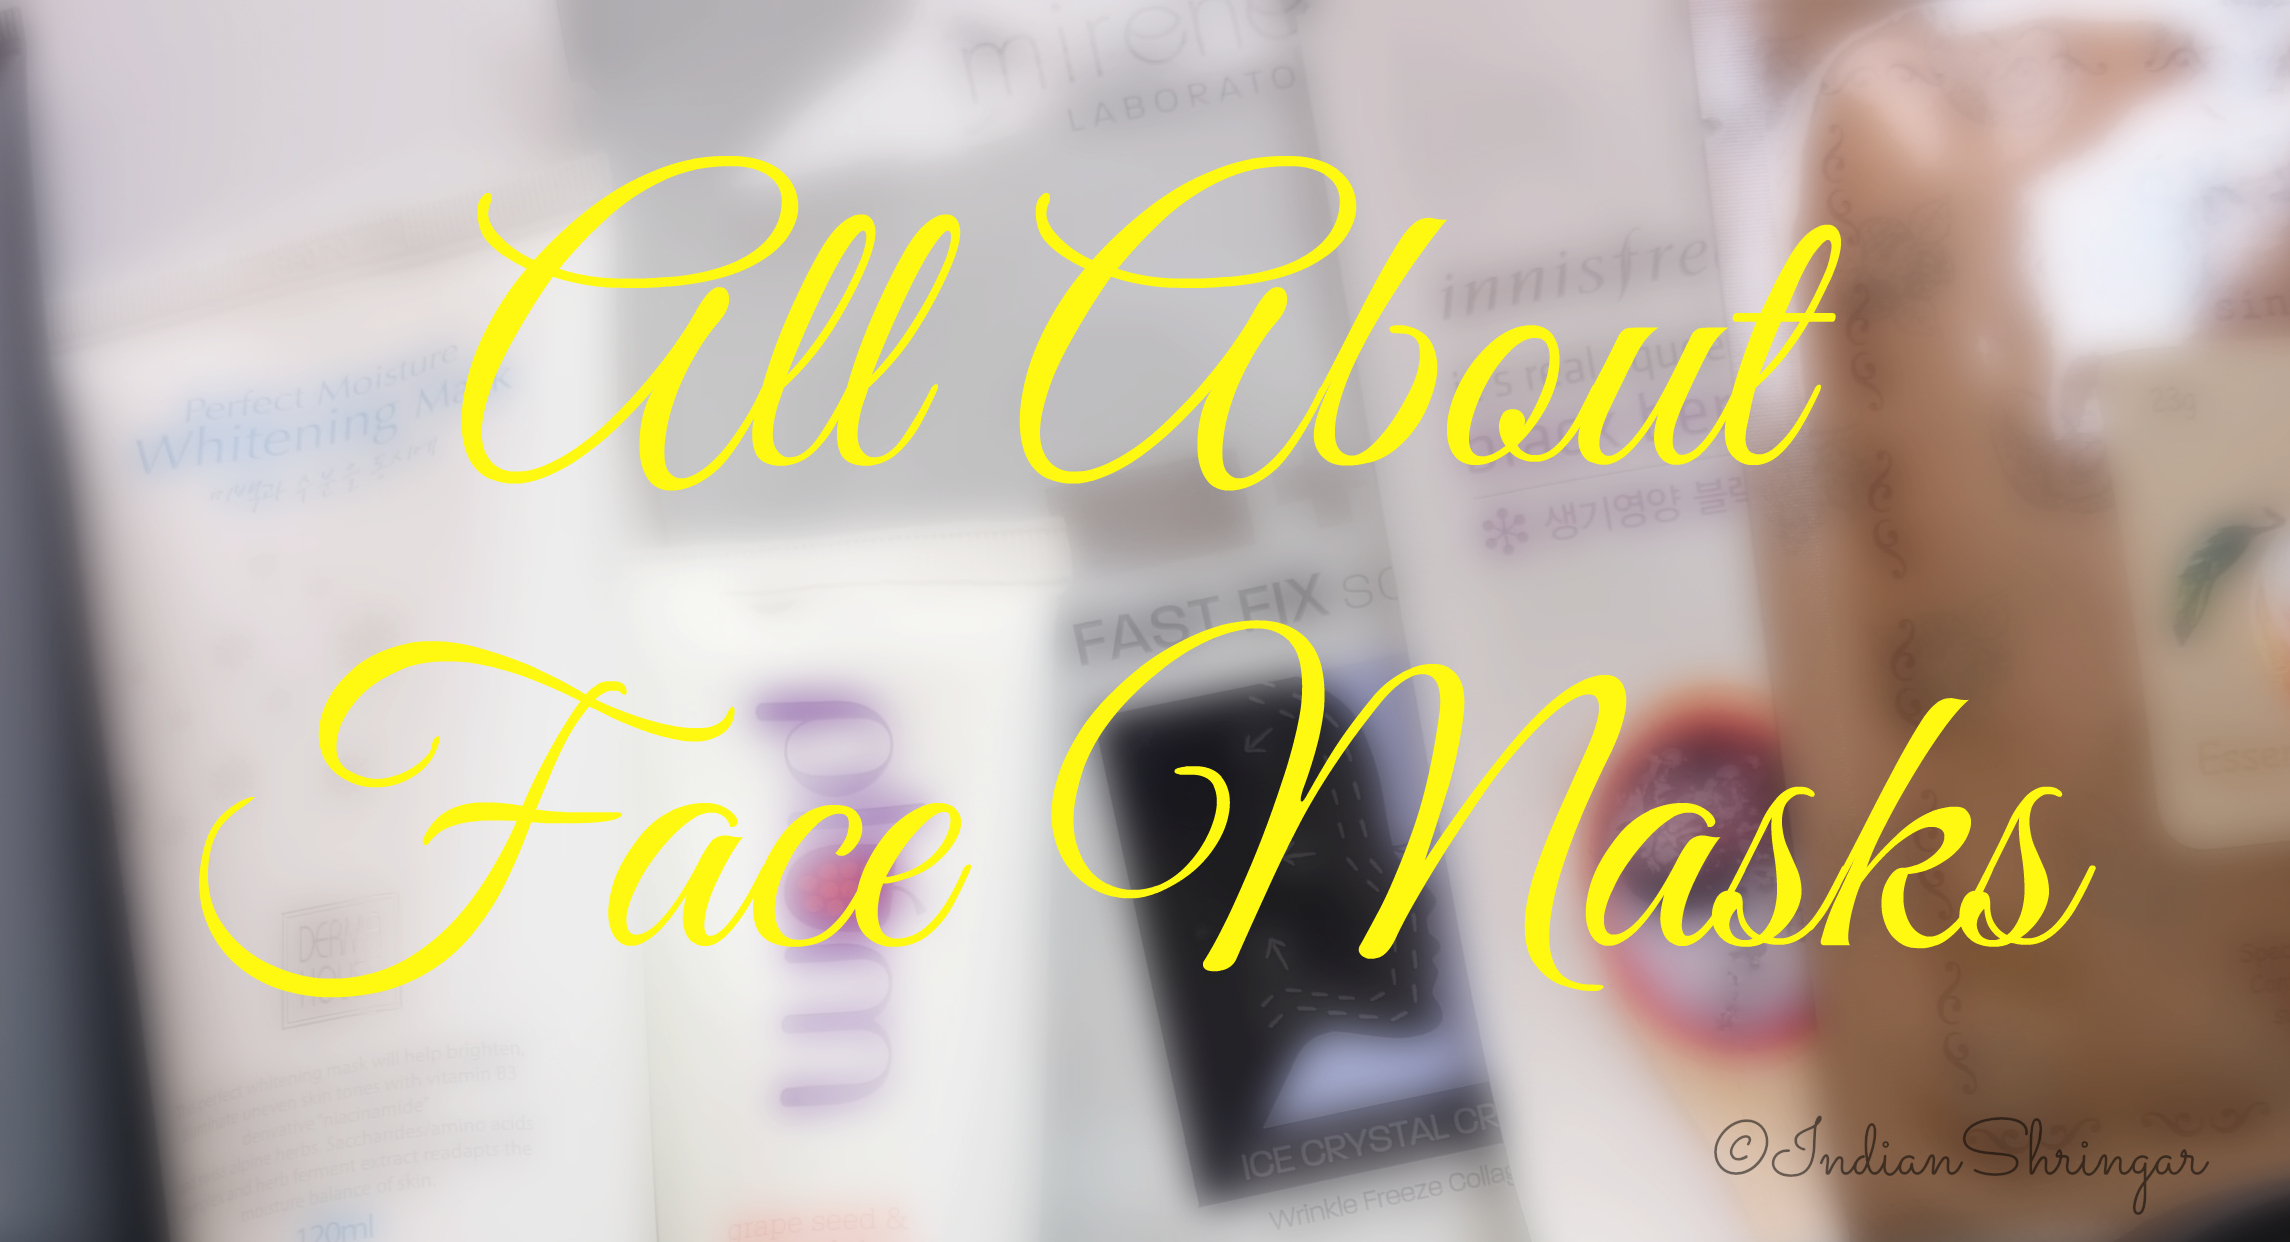 All about face masks